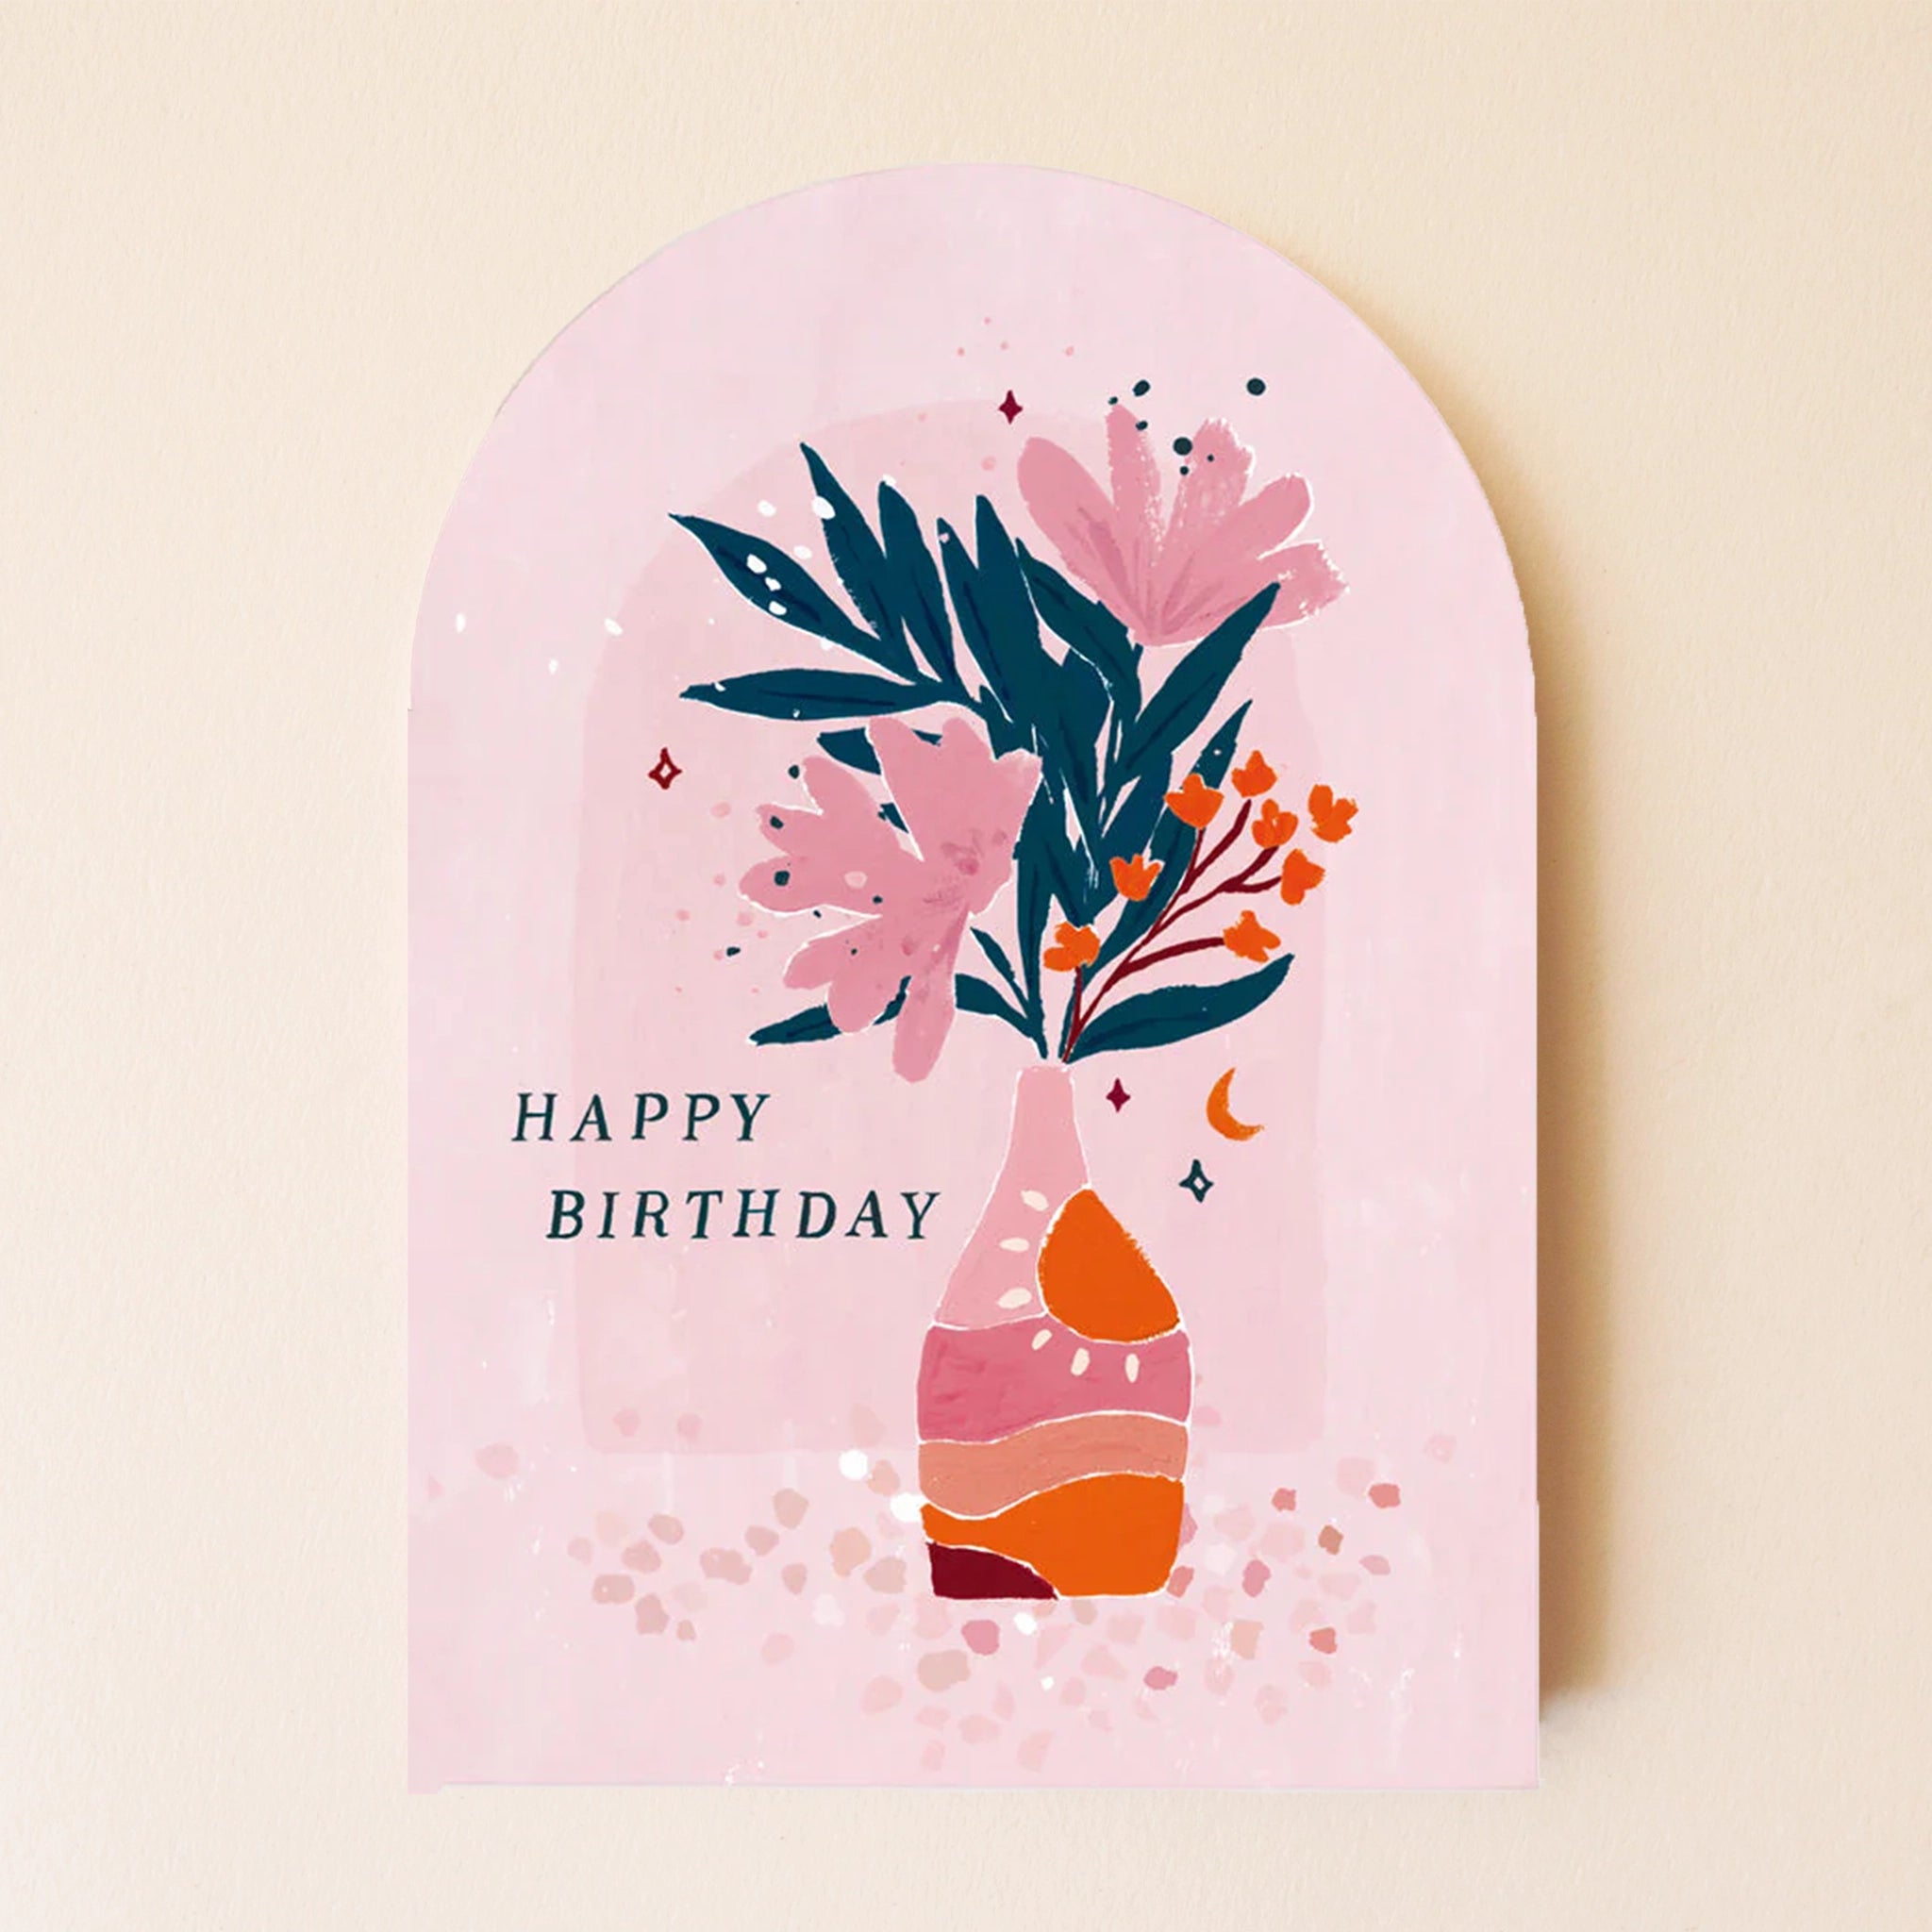 A pink arched birthday card with an illustration of a pink and orange striped vase with a green, pink and orange flower arrangement inside as well as text on the left that reads "Happy Birthday".